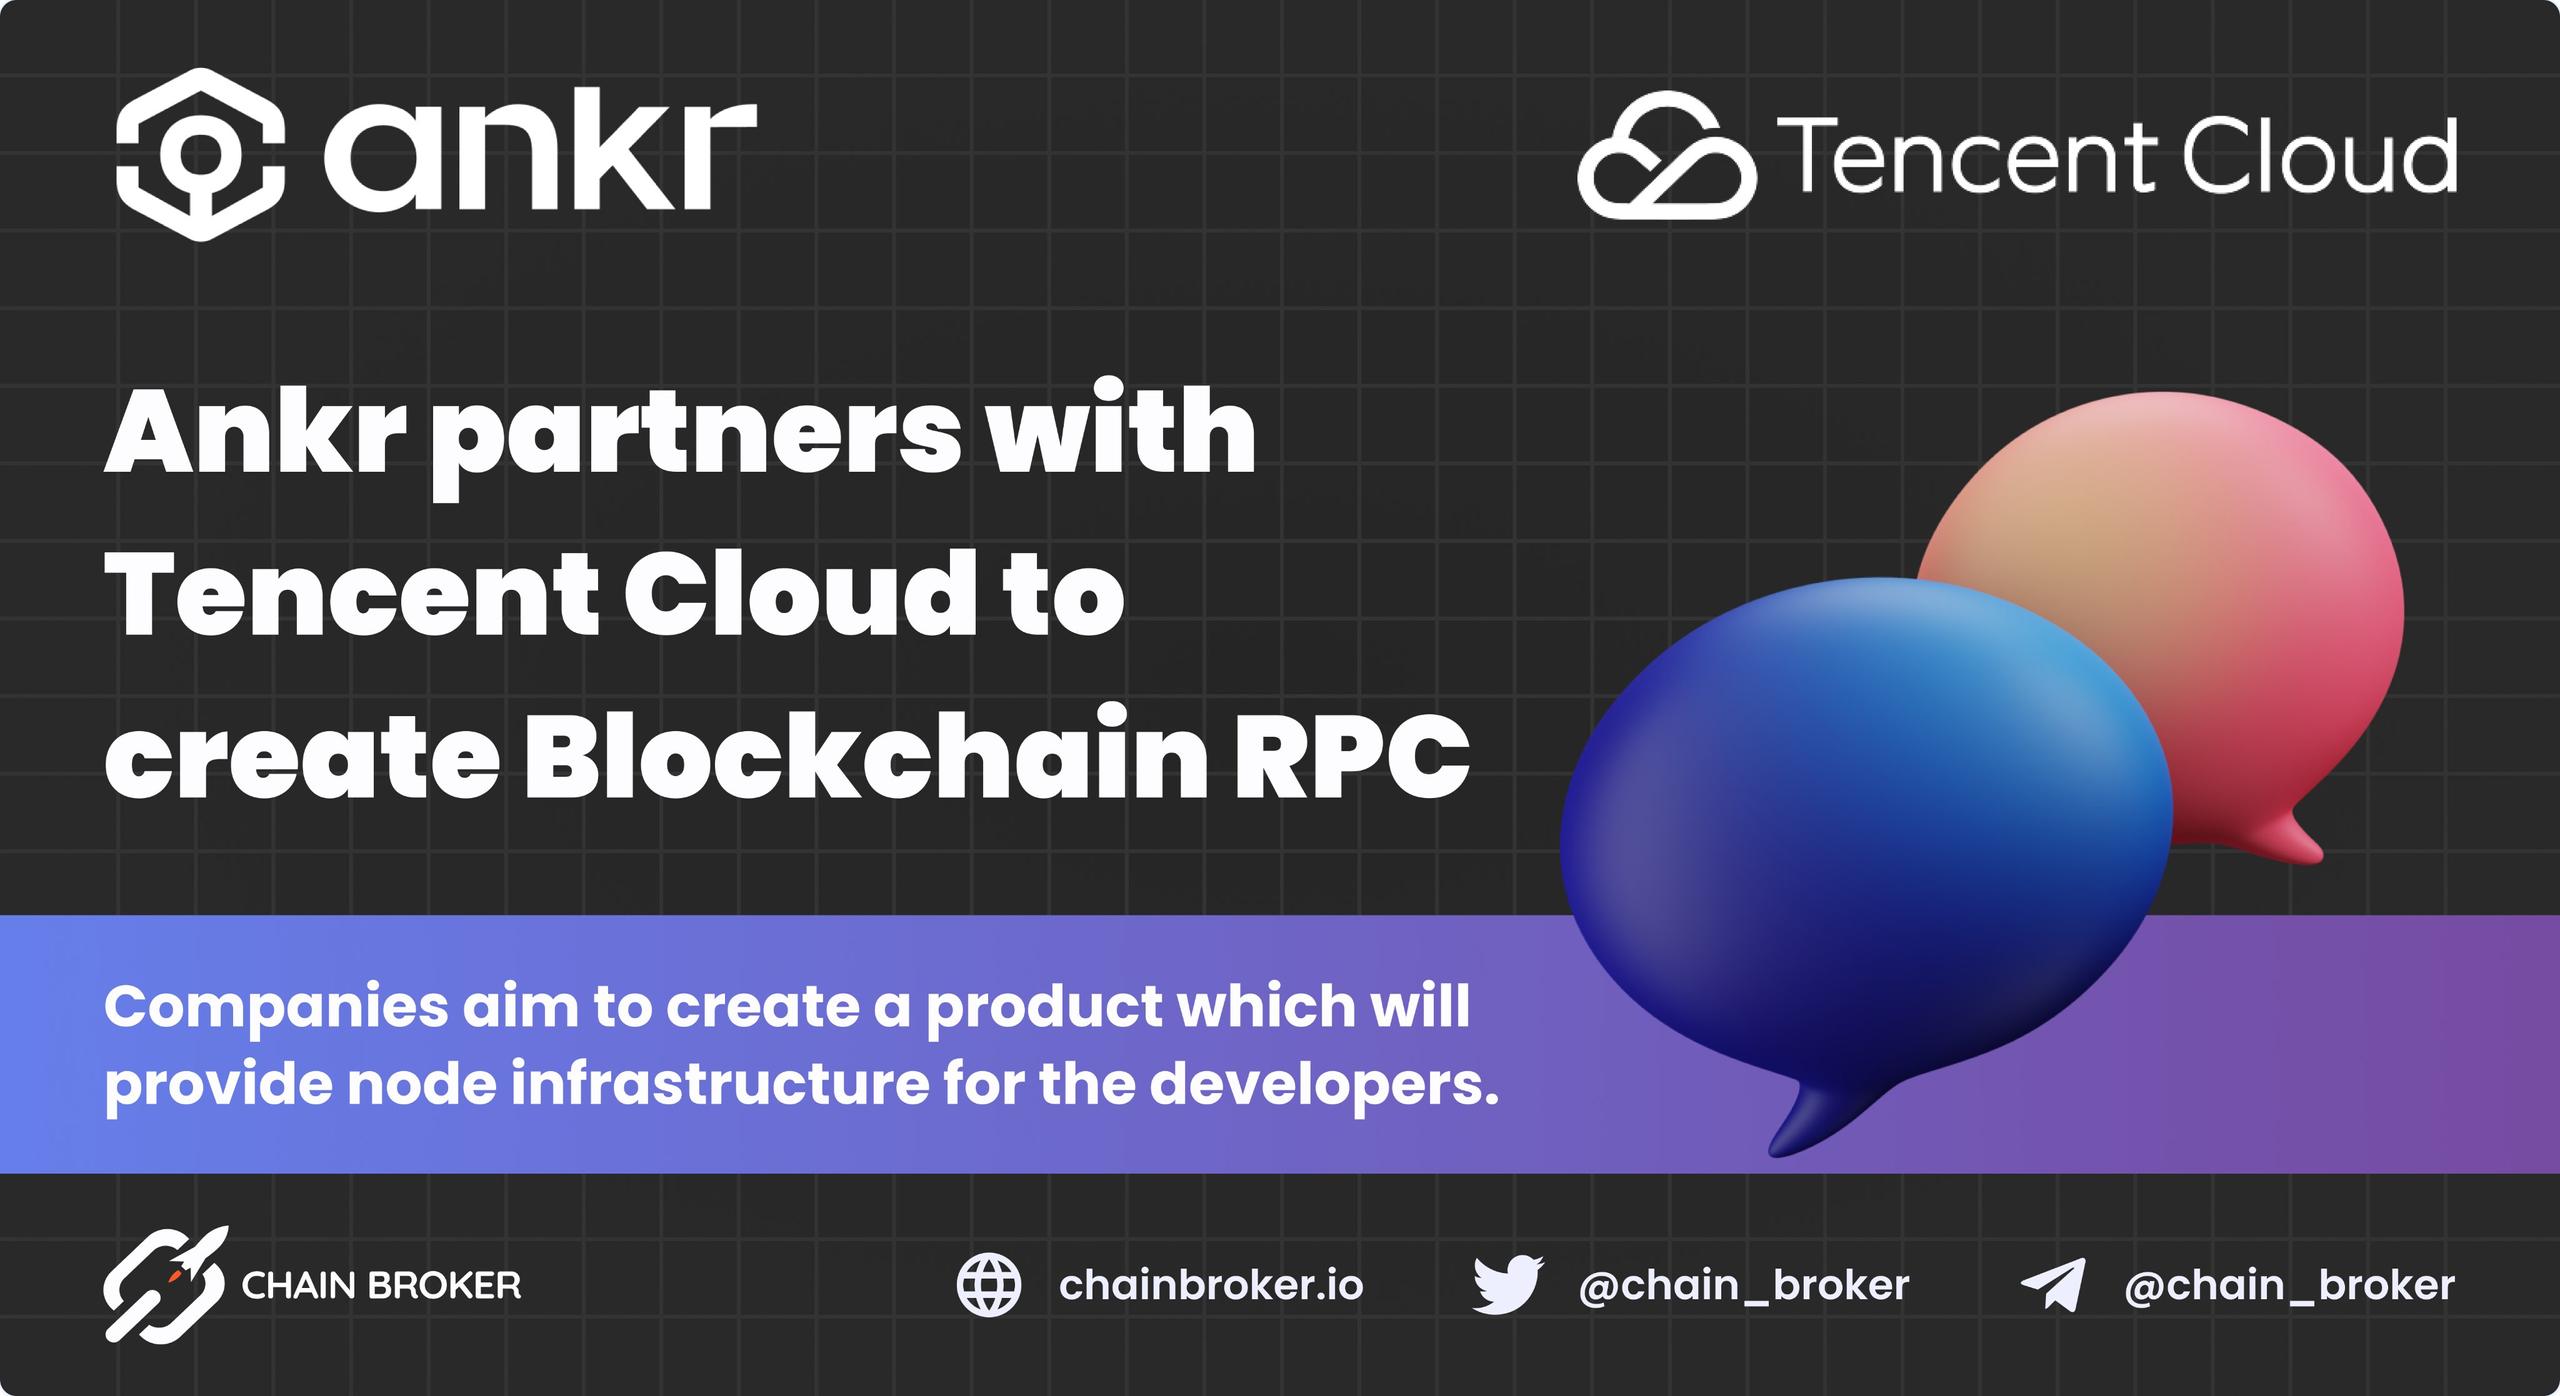 Ankr partners with Tencent Cloud to create Blockchain RPC